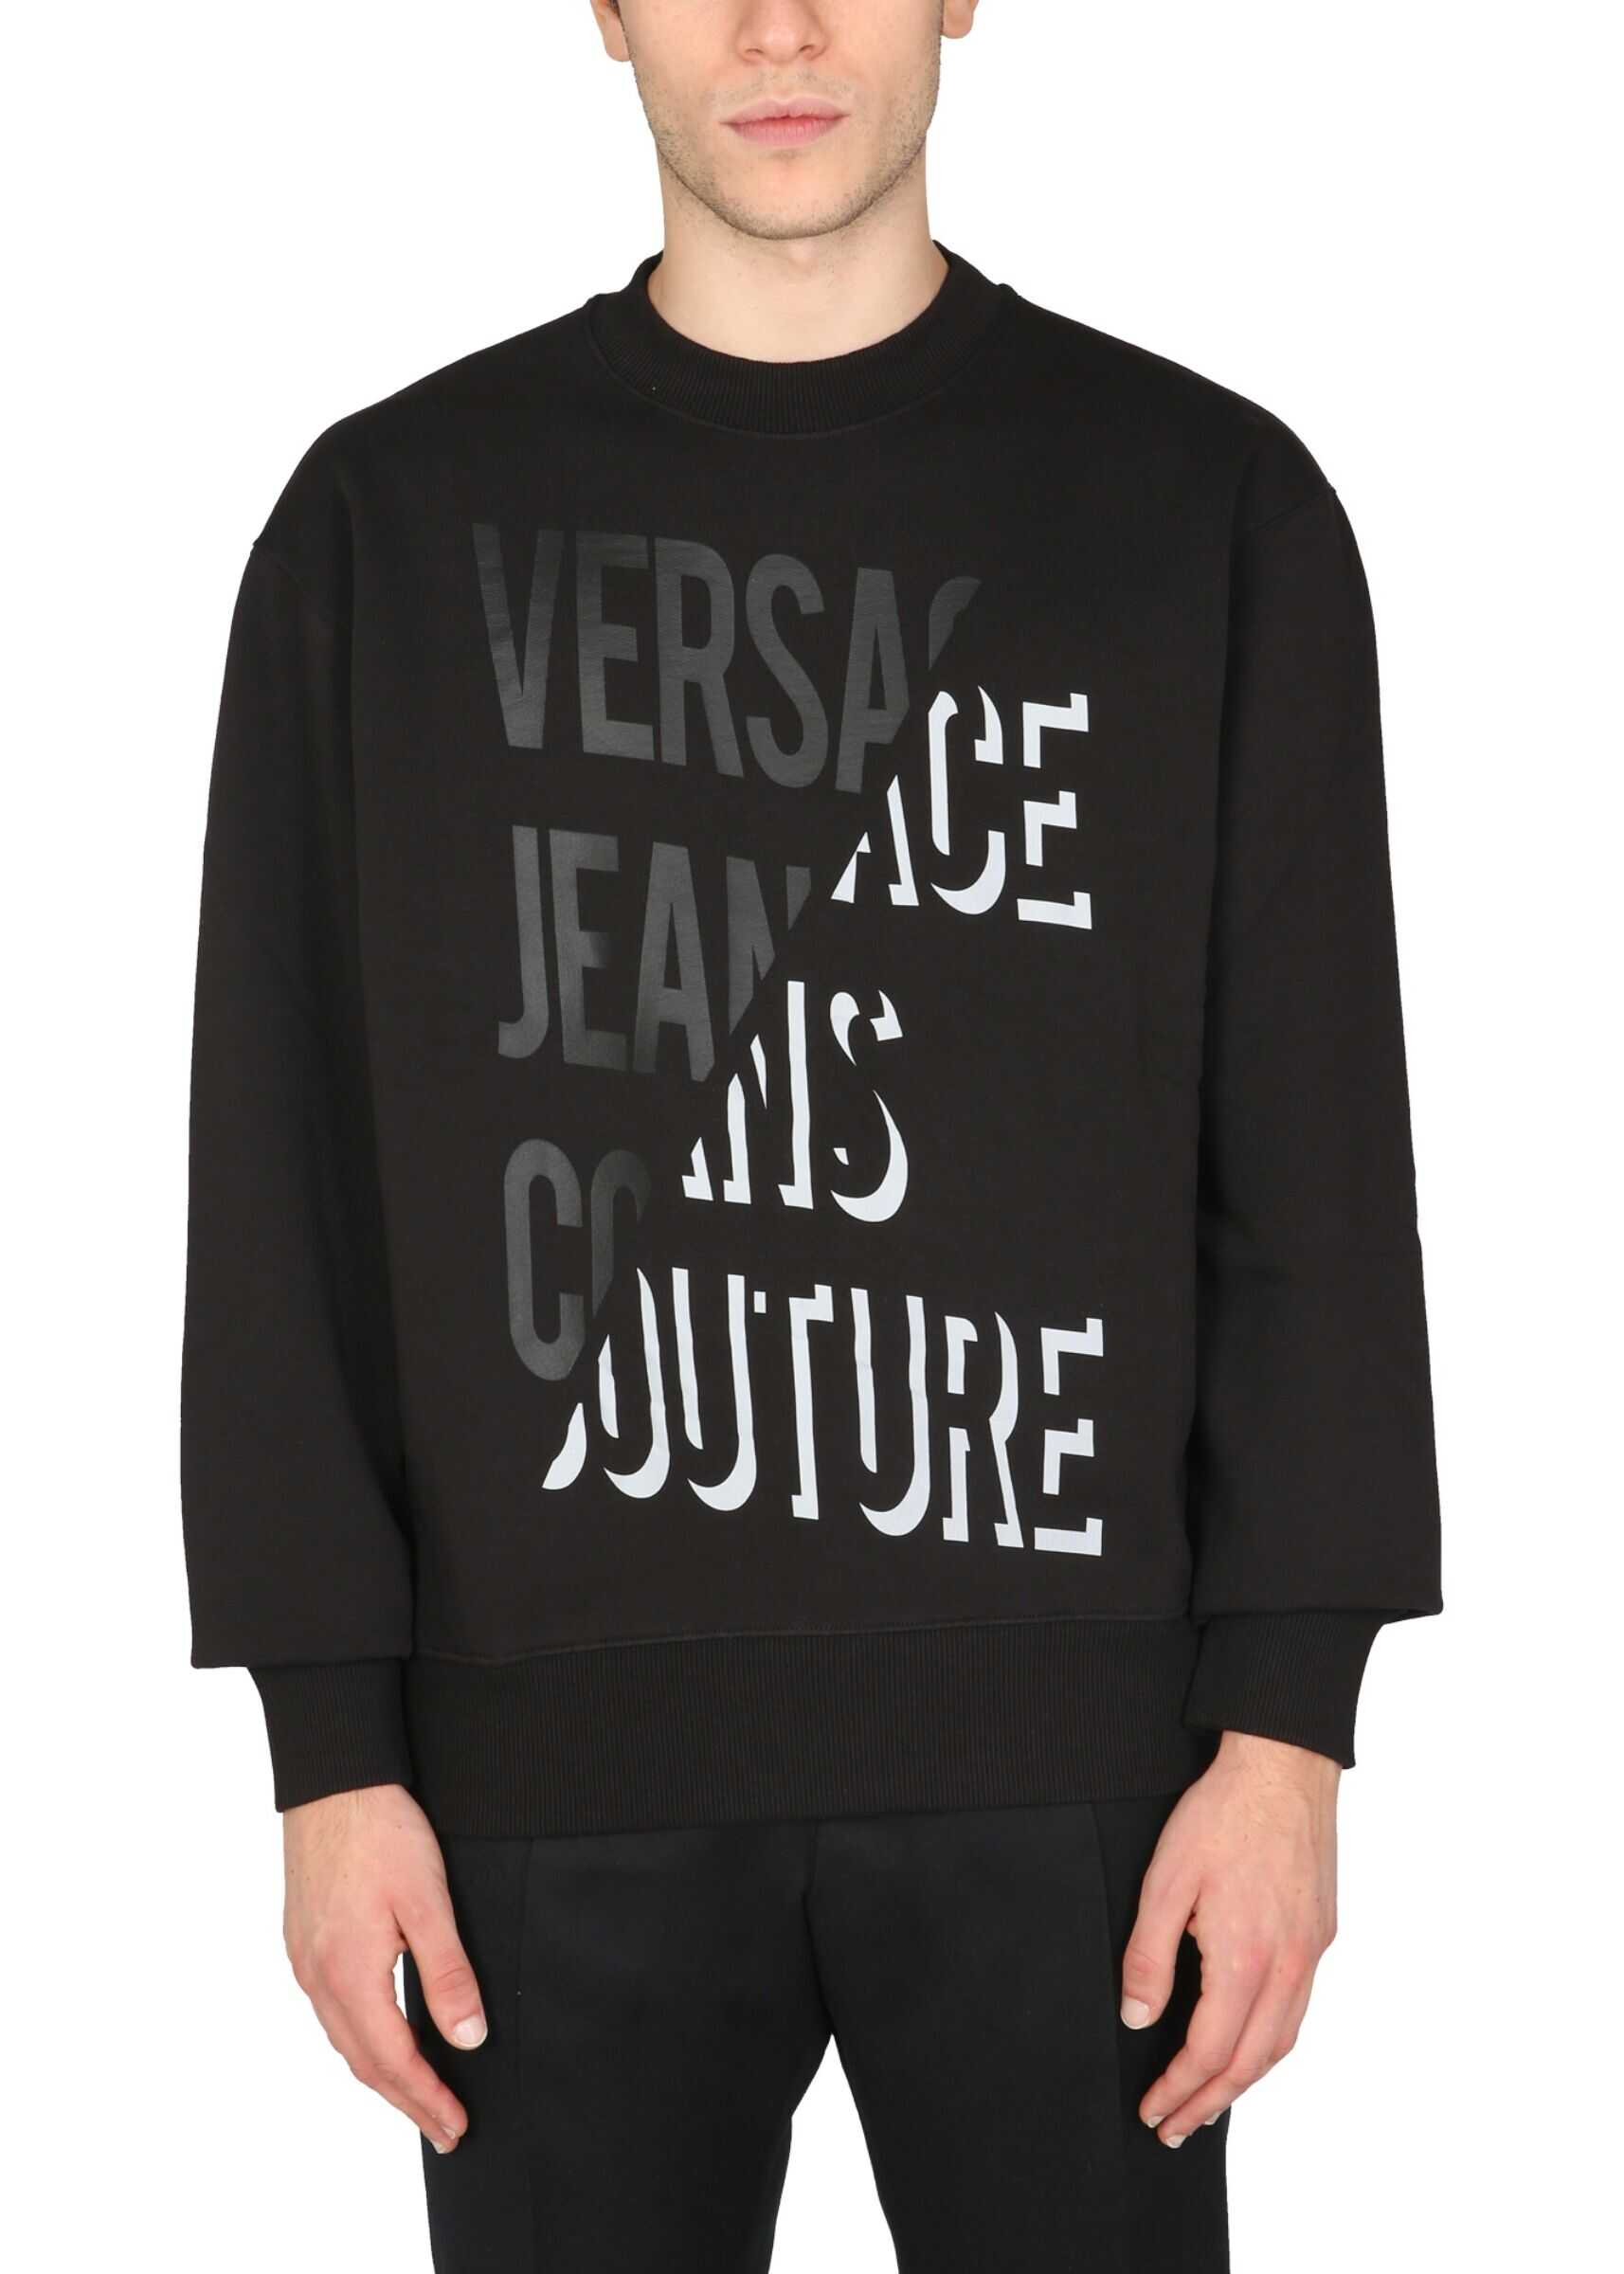 Versace Jeans Couture Sweatshirt With Logo 71GAIF03_CF00F899 BLACK